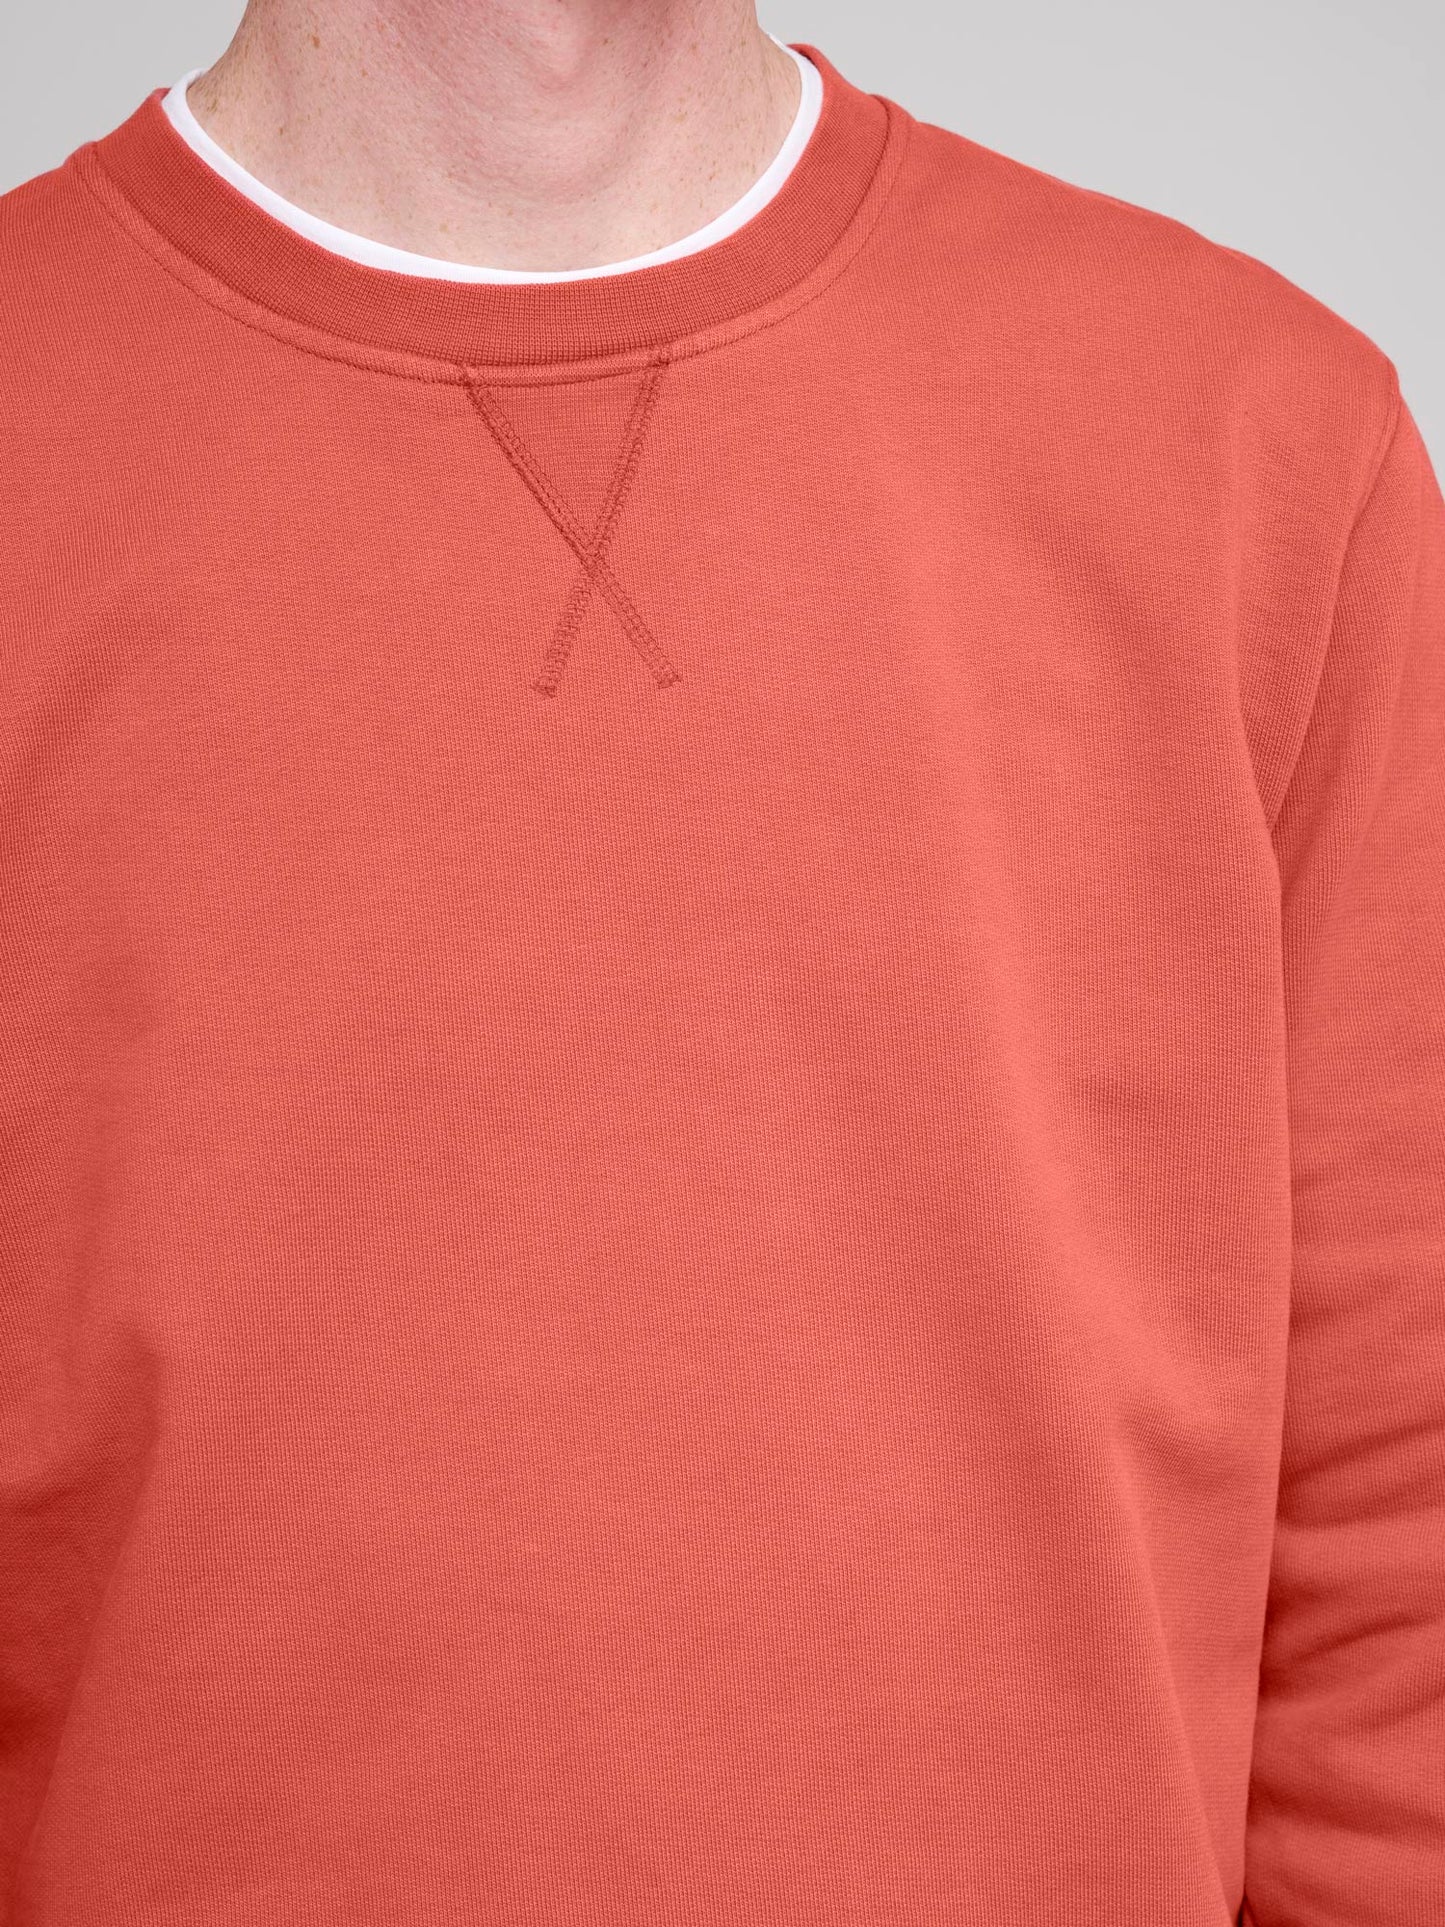 Cotton Loopback Crew Sweat, Dusty Red